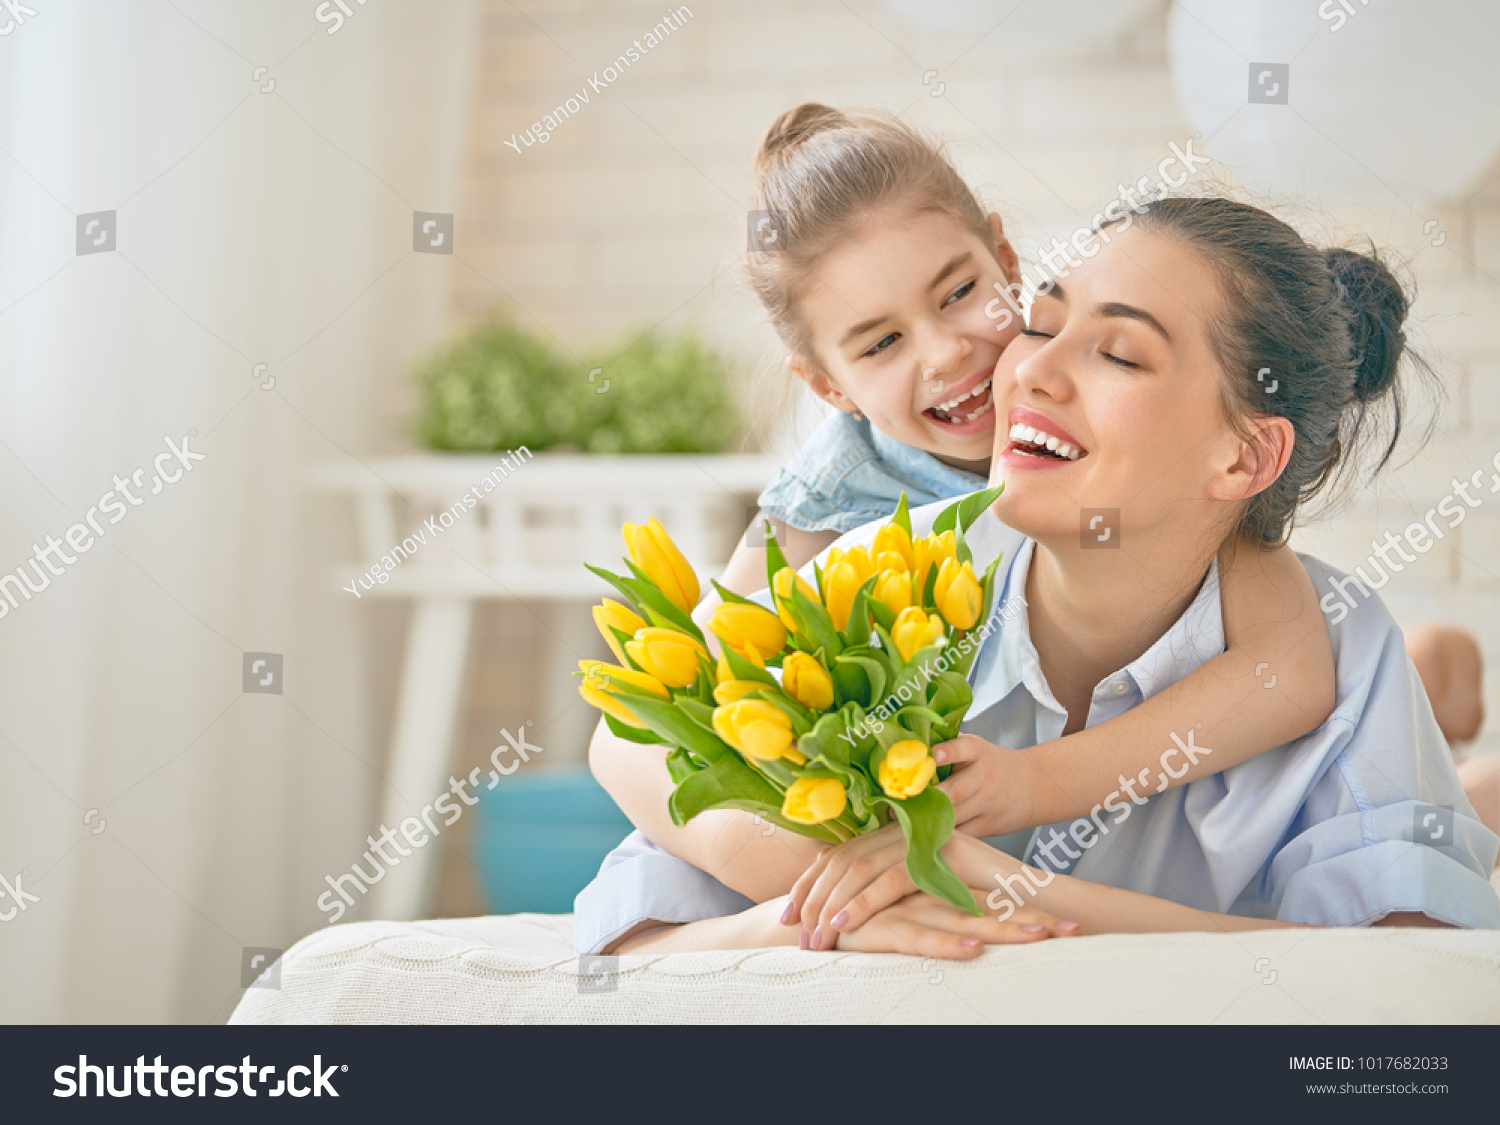 Happy mother's day! Child daughter is congratulating mom and giving her flowers tulips. Mum and girl smiling and hugging. Family holiday and togetherness. #1017682033